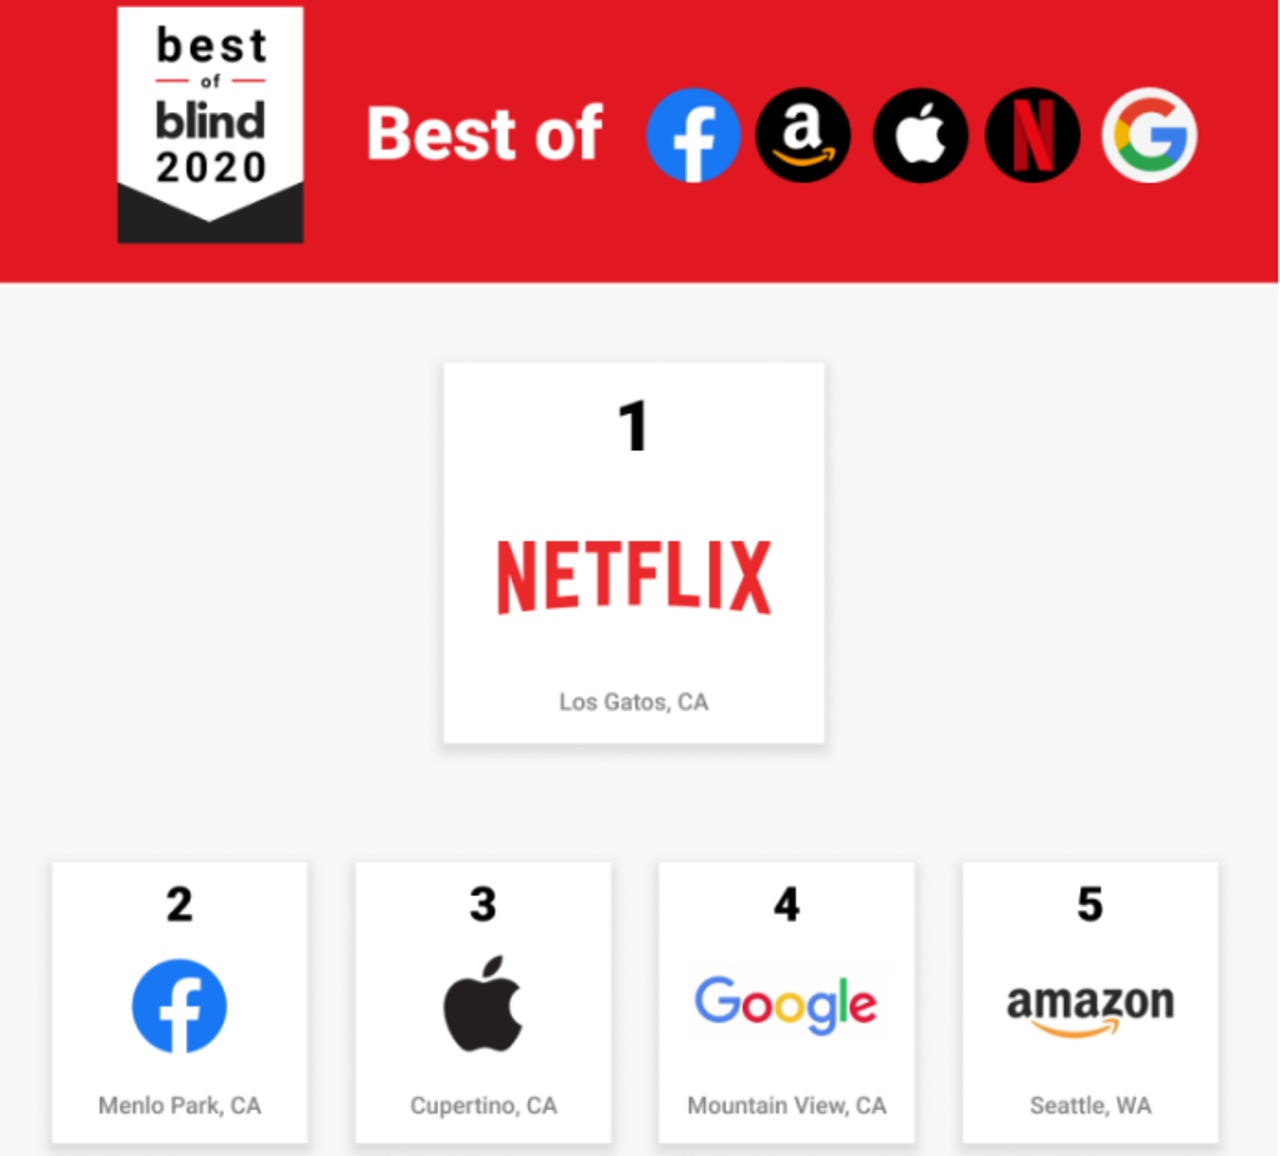 Facebook, Amazon, Apple, Netflix, and Google - which is the best company to work for zdnet